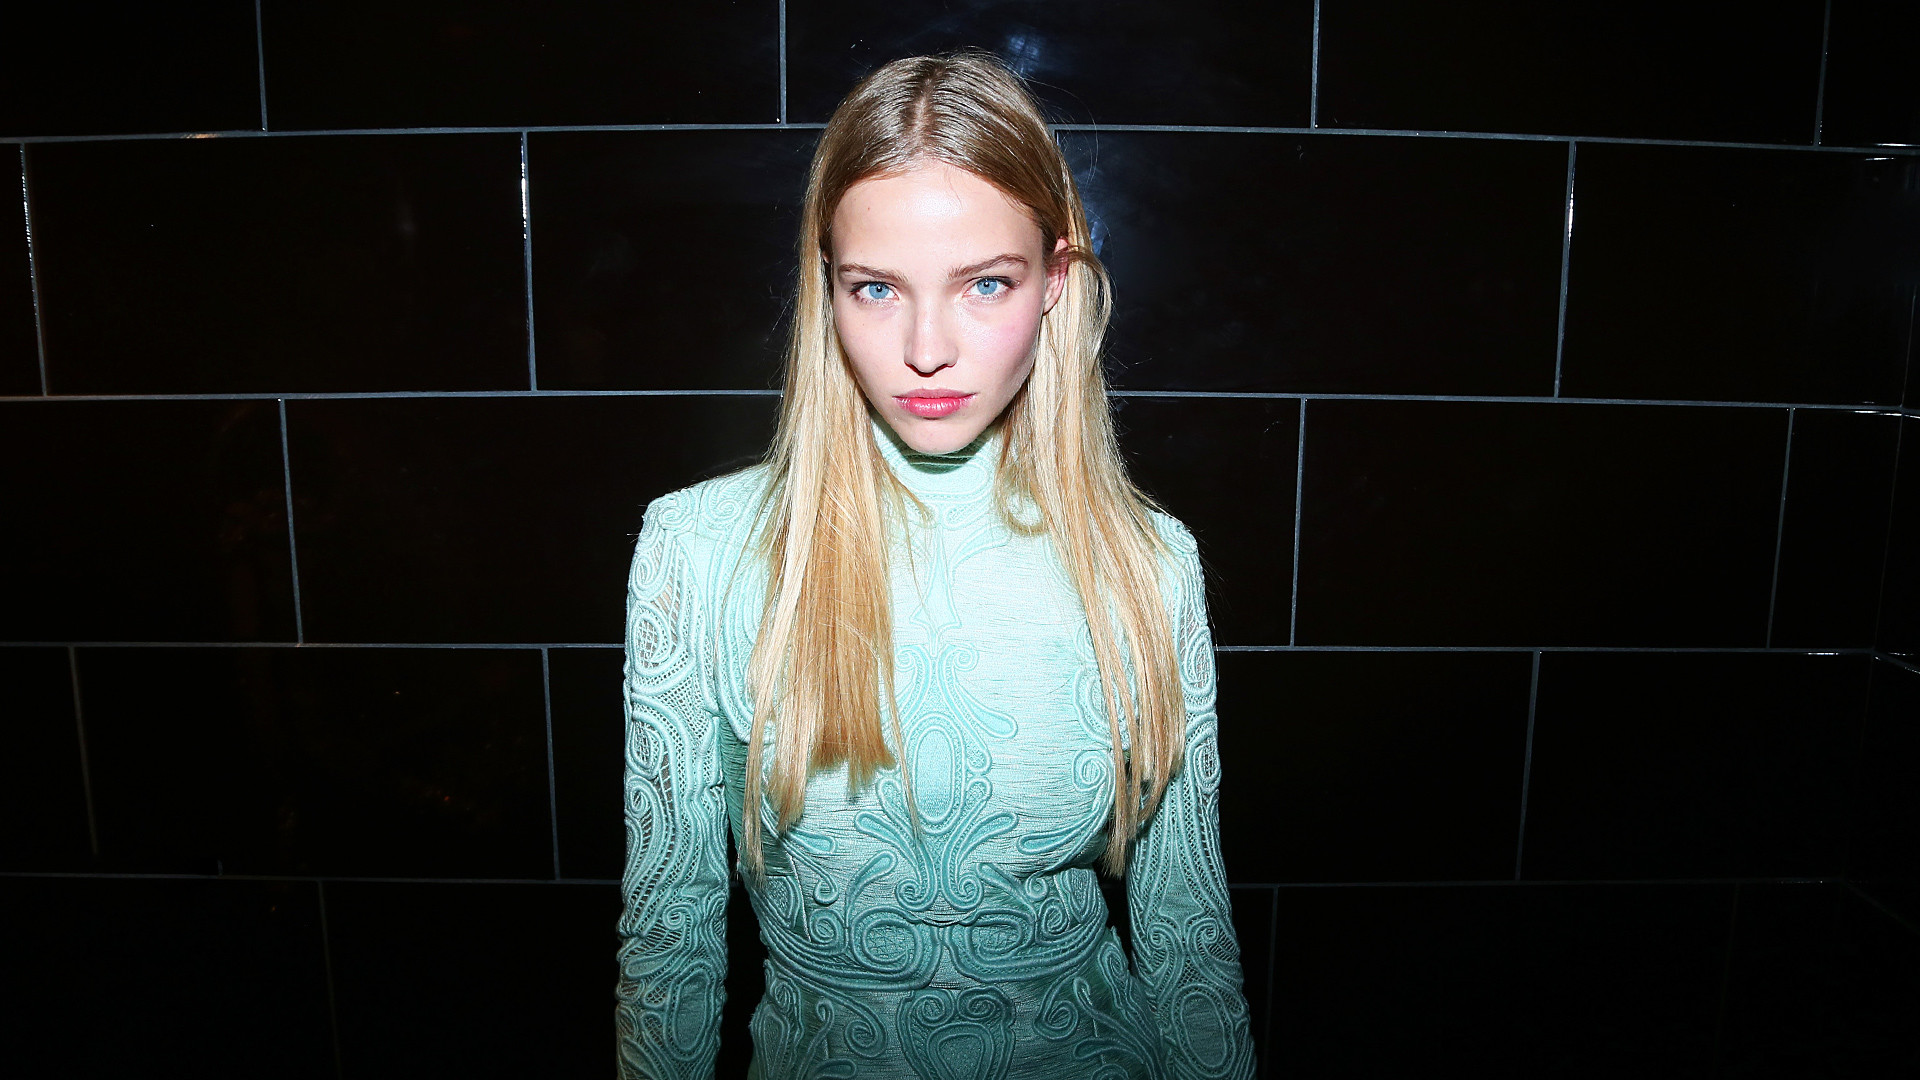 Model Sasha Luss attends the Balmain Menswear Spring/Summer 2017 after party as part of Paris Fashion Week at Les Bains on June 25, 2016 in Paris, France